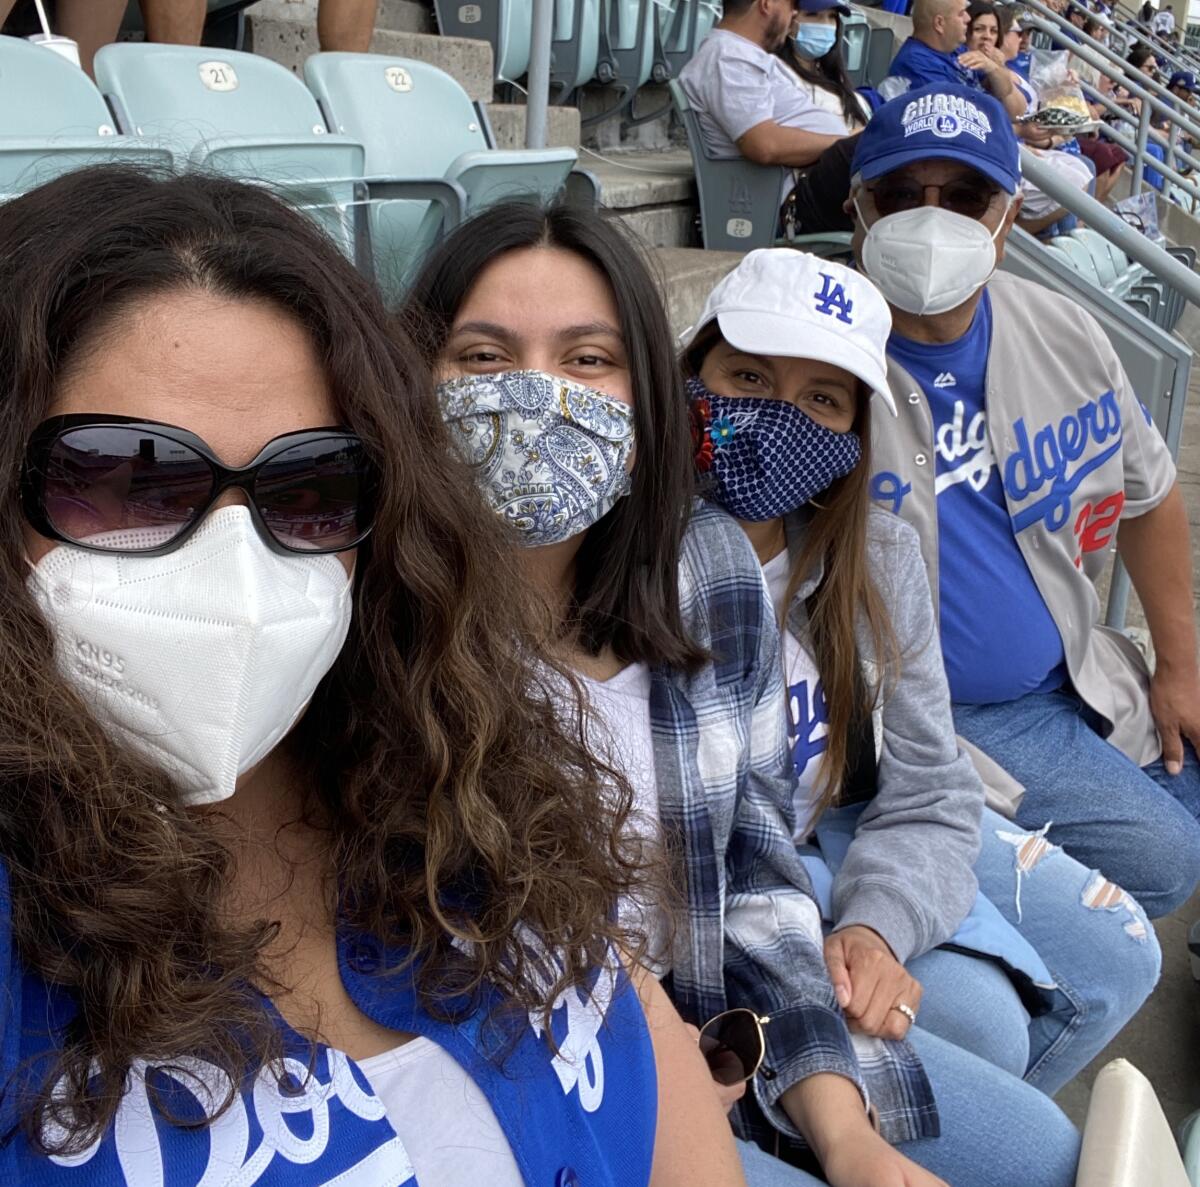 Four people in team shirts and colors pose for a selfie at Dodger Stadium